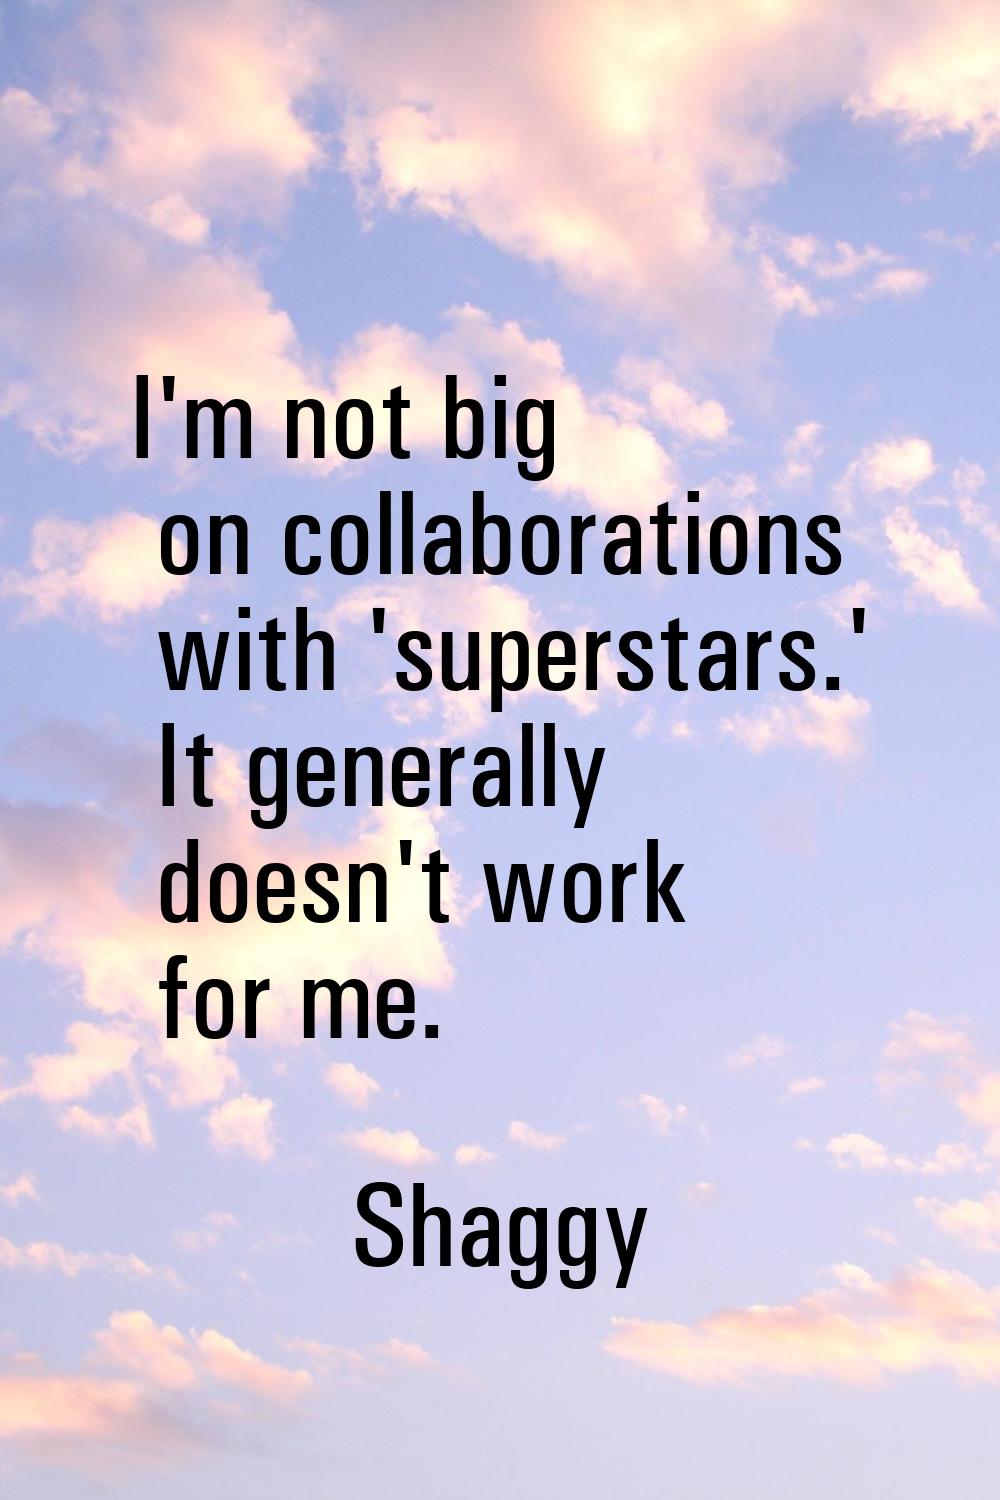 I'm not big on collaborations with 'superstars.' It generally doesn't work for me.